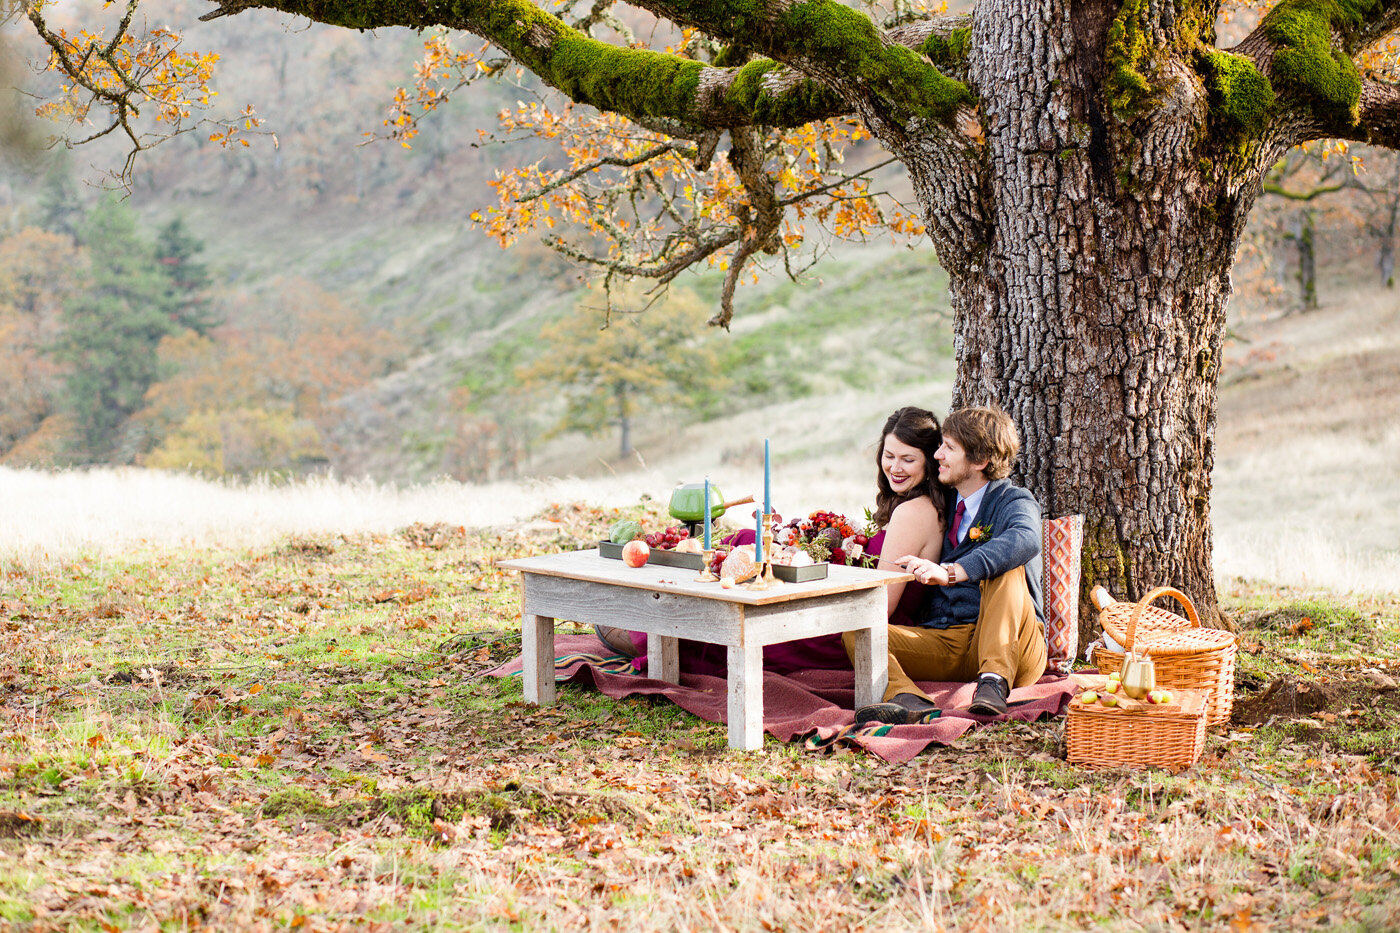 Eloping couple in beautiful outdoor setting with picnic spread